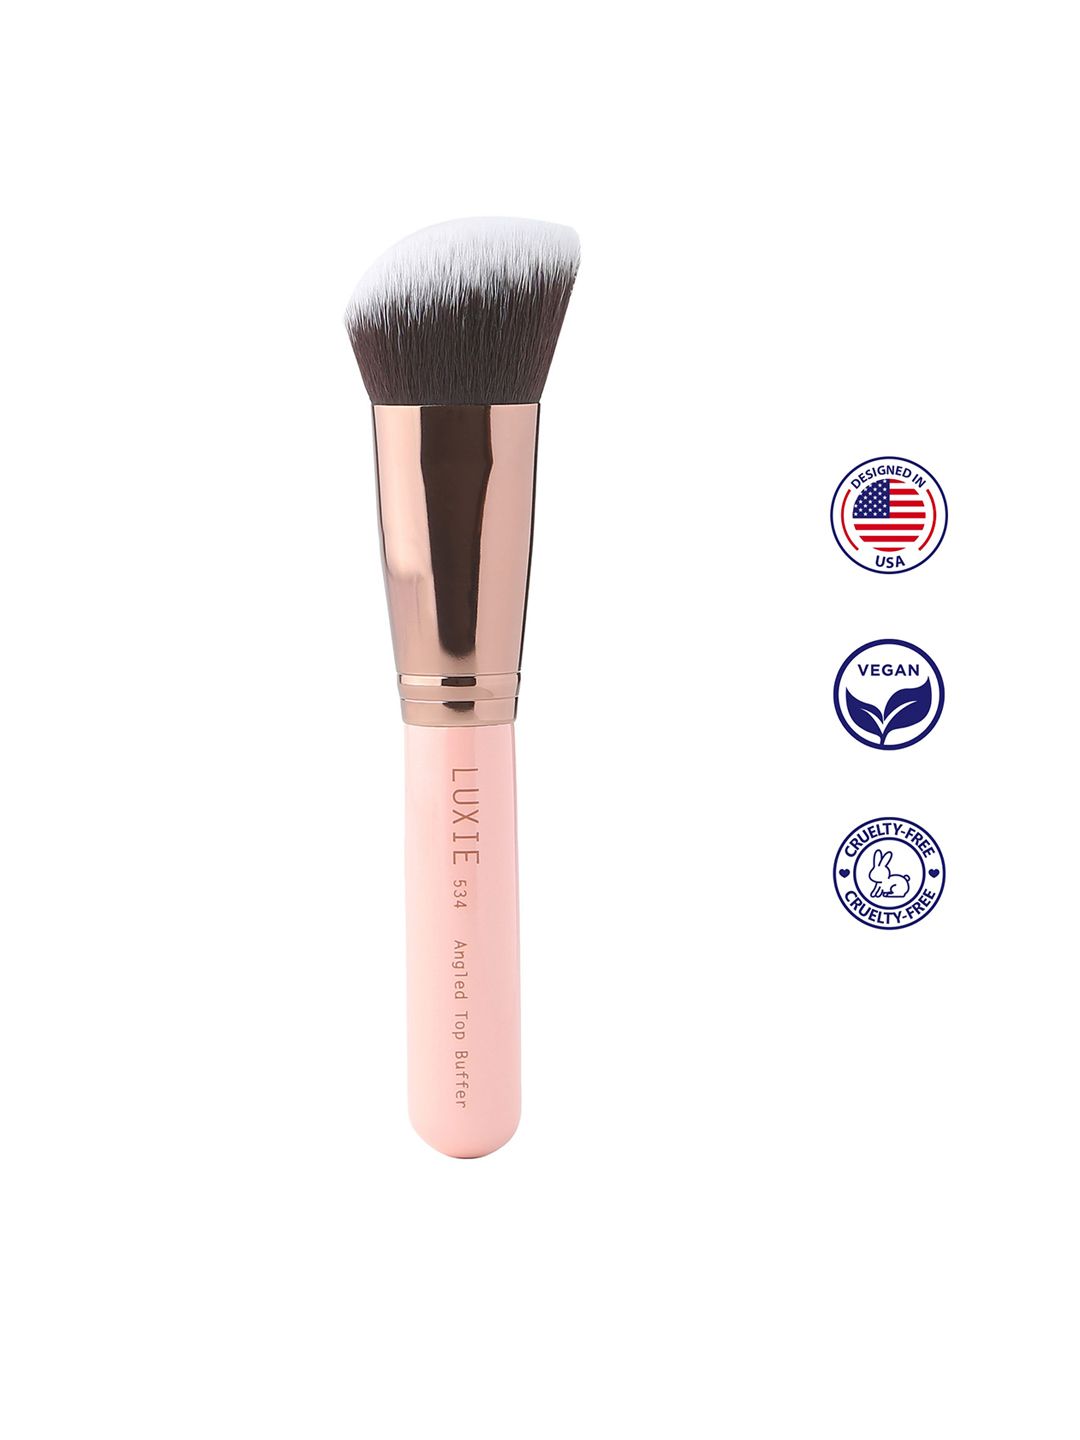 LUXIE Rose Gold Angled Top Buffer Brush - 534 Price in India